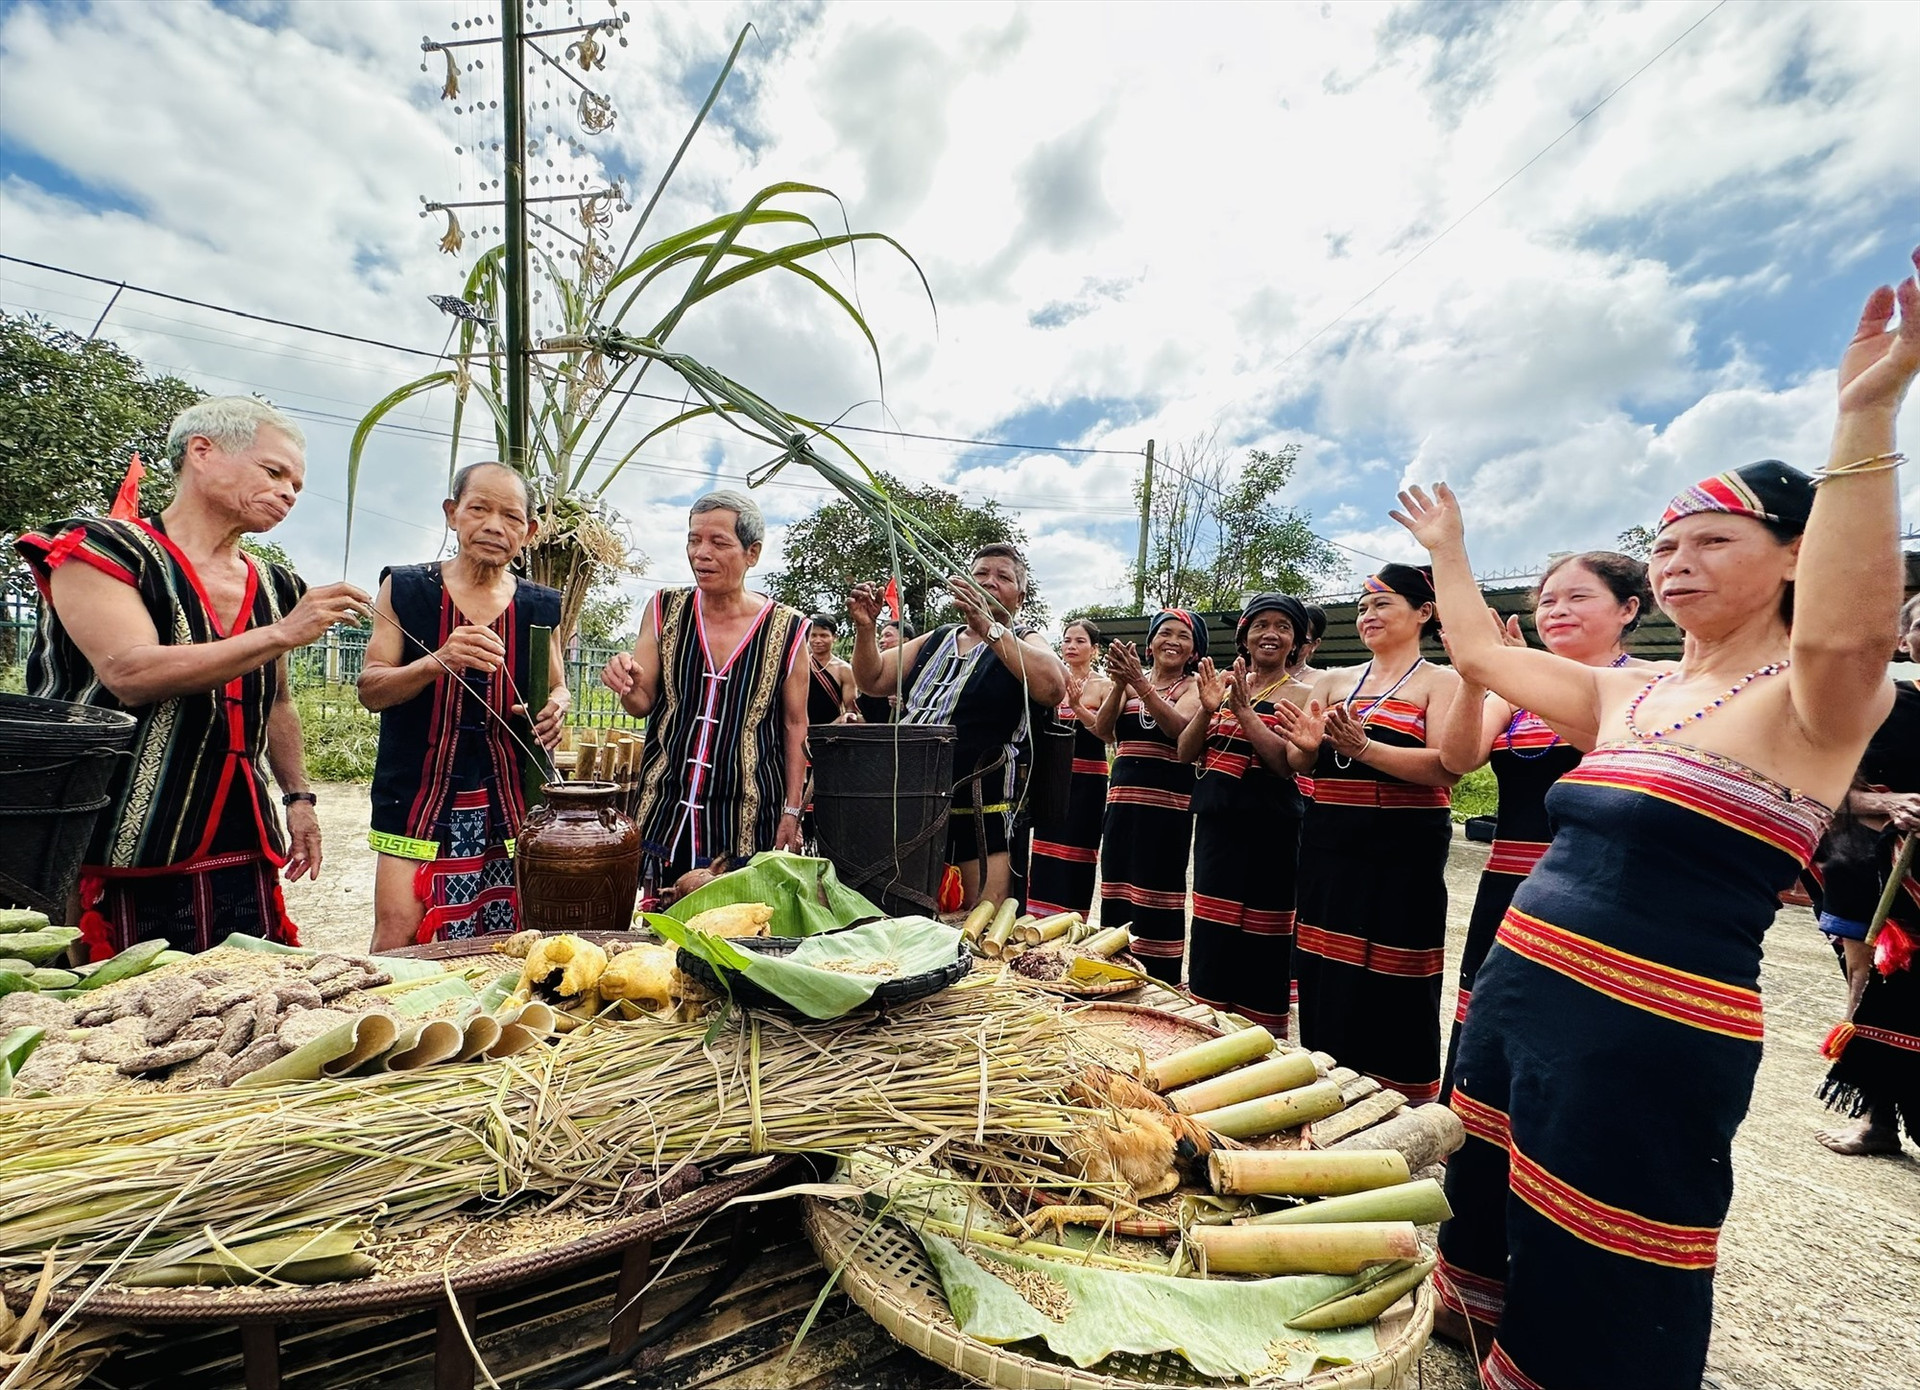 The villagers with the joy of celebrating the new rice harvest.